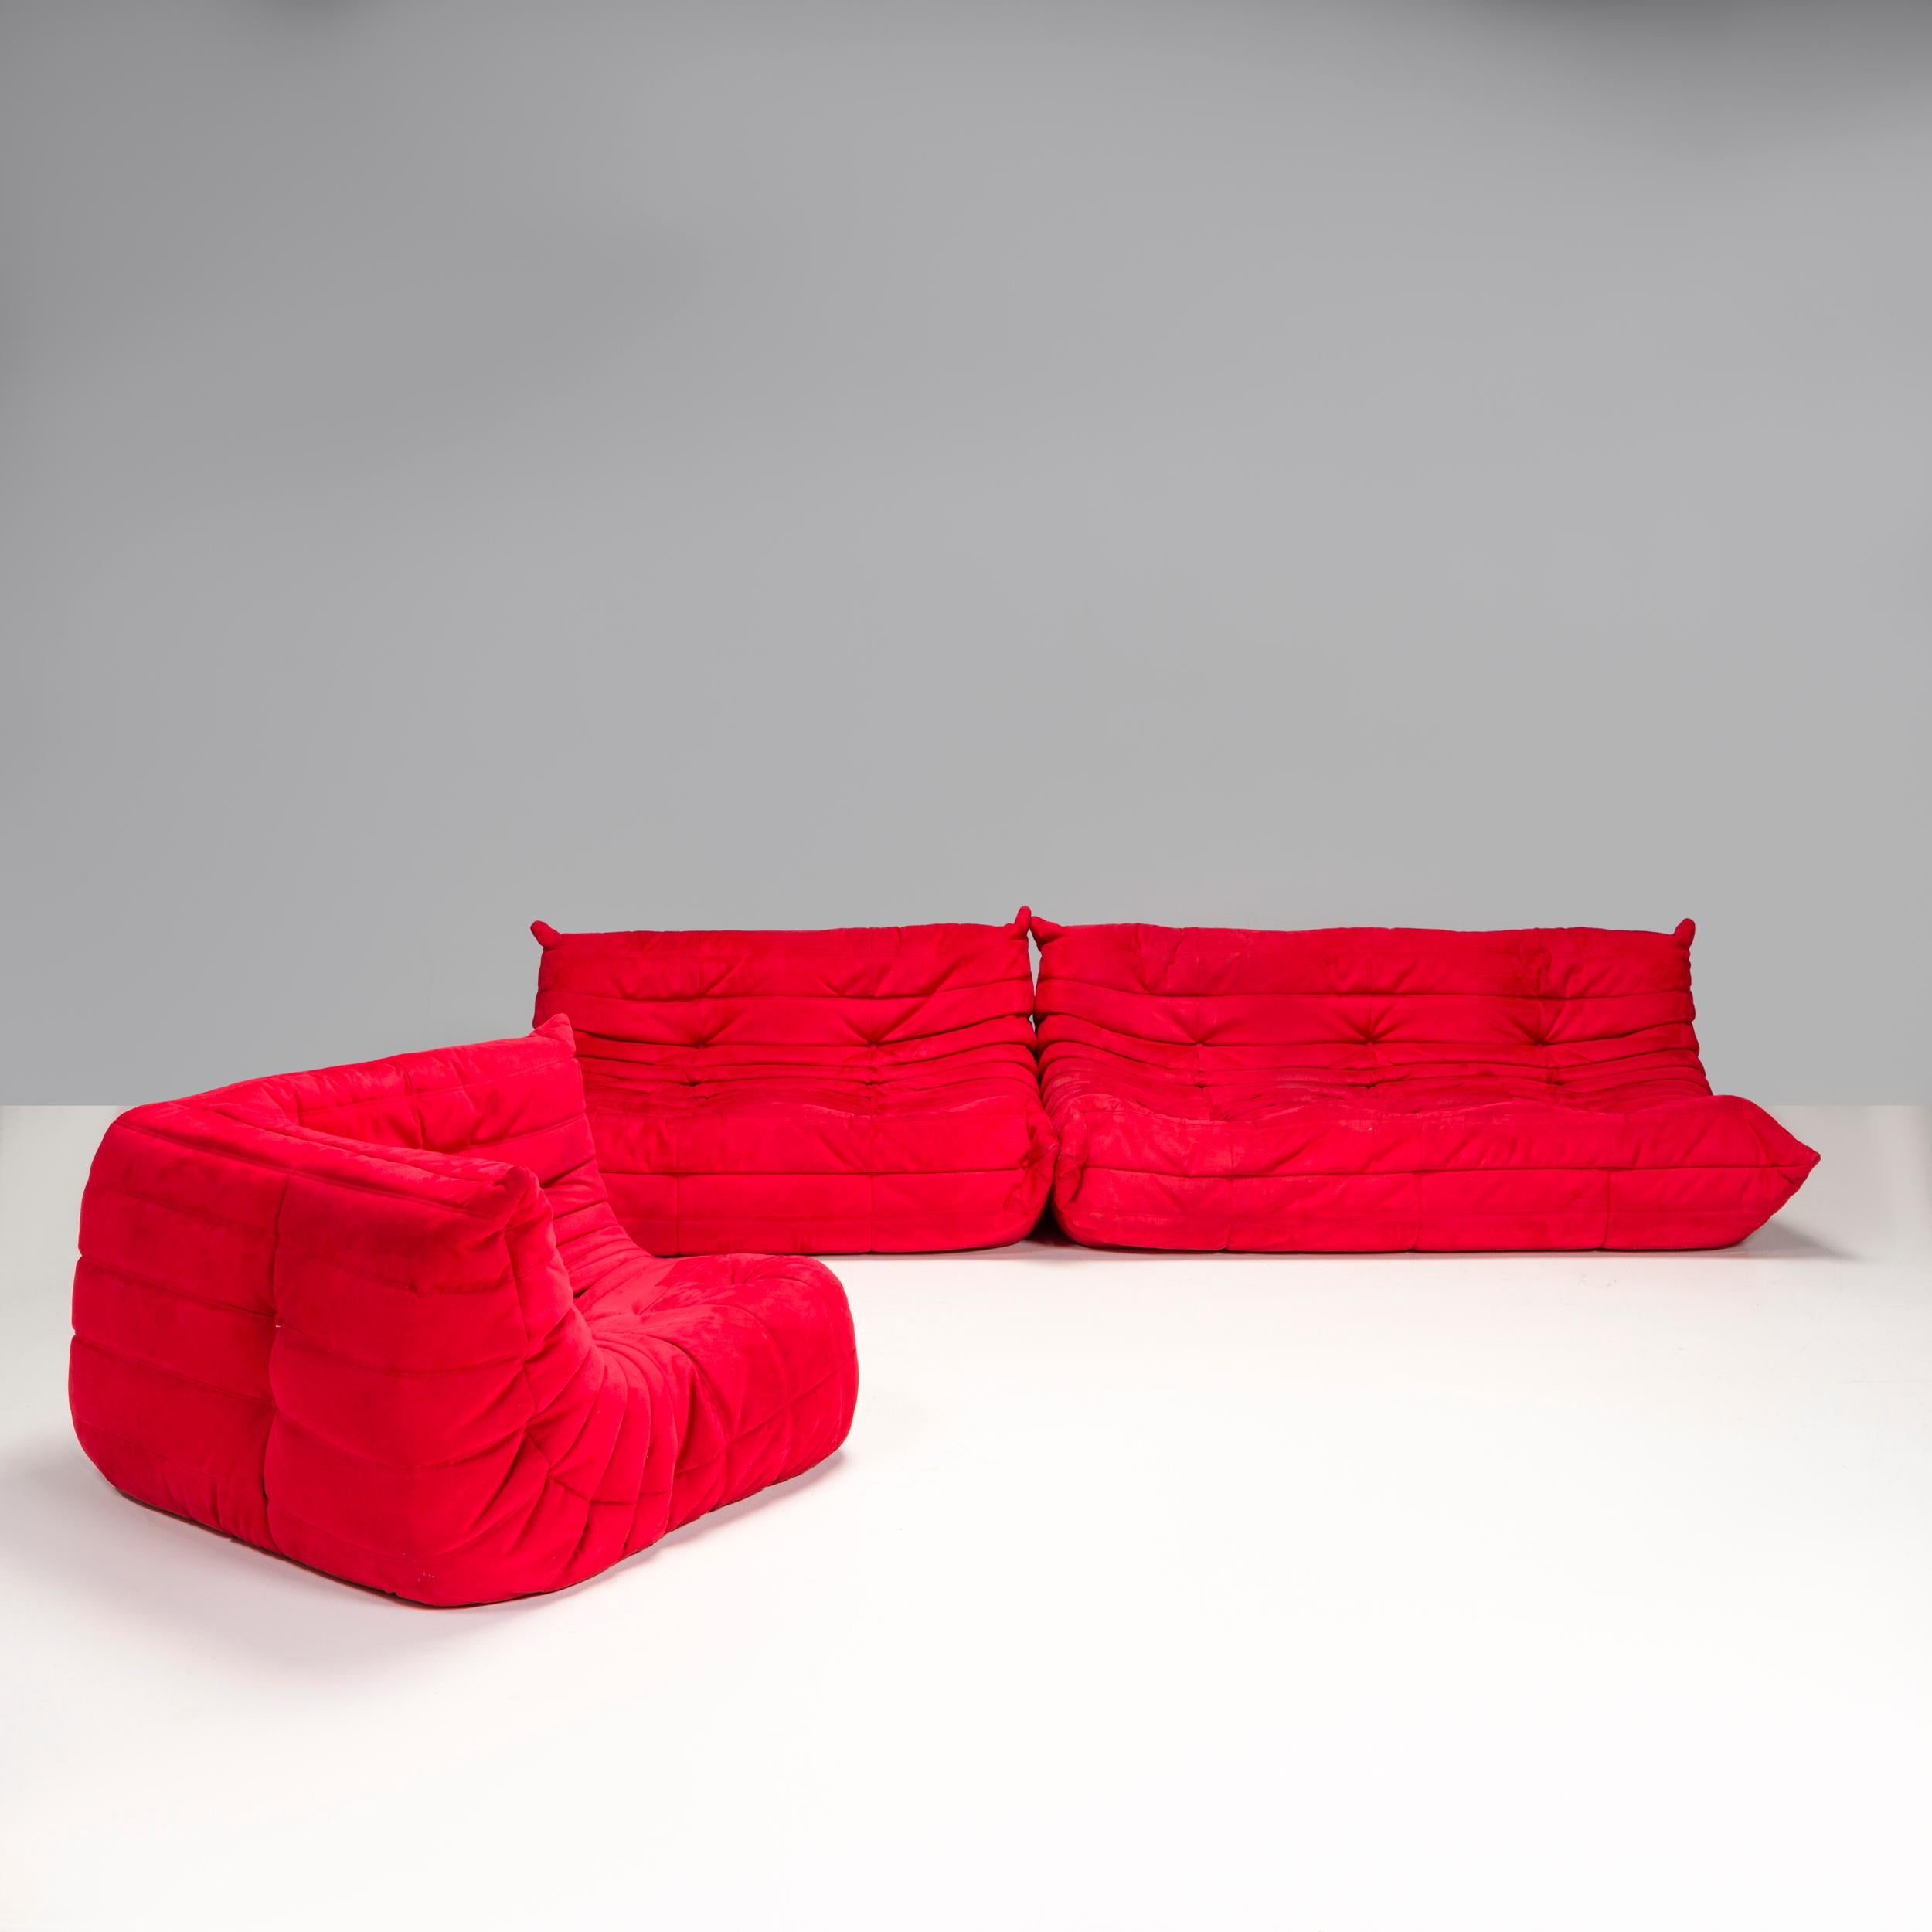 French Ligne Roset by Michel Ducaroy Togo Red Alcantara Sectional Sofa, Set of 3 For Sale